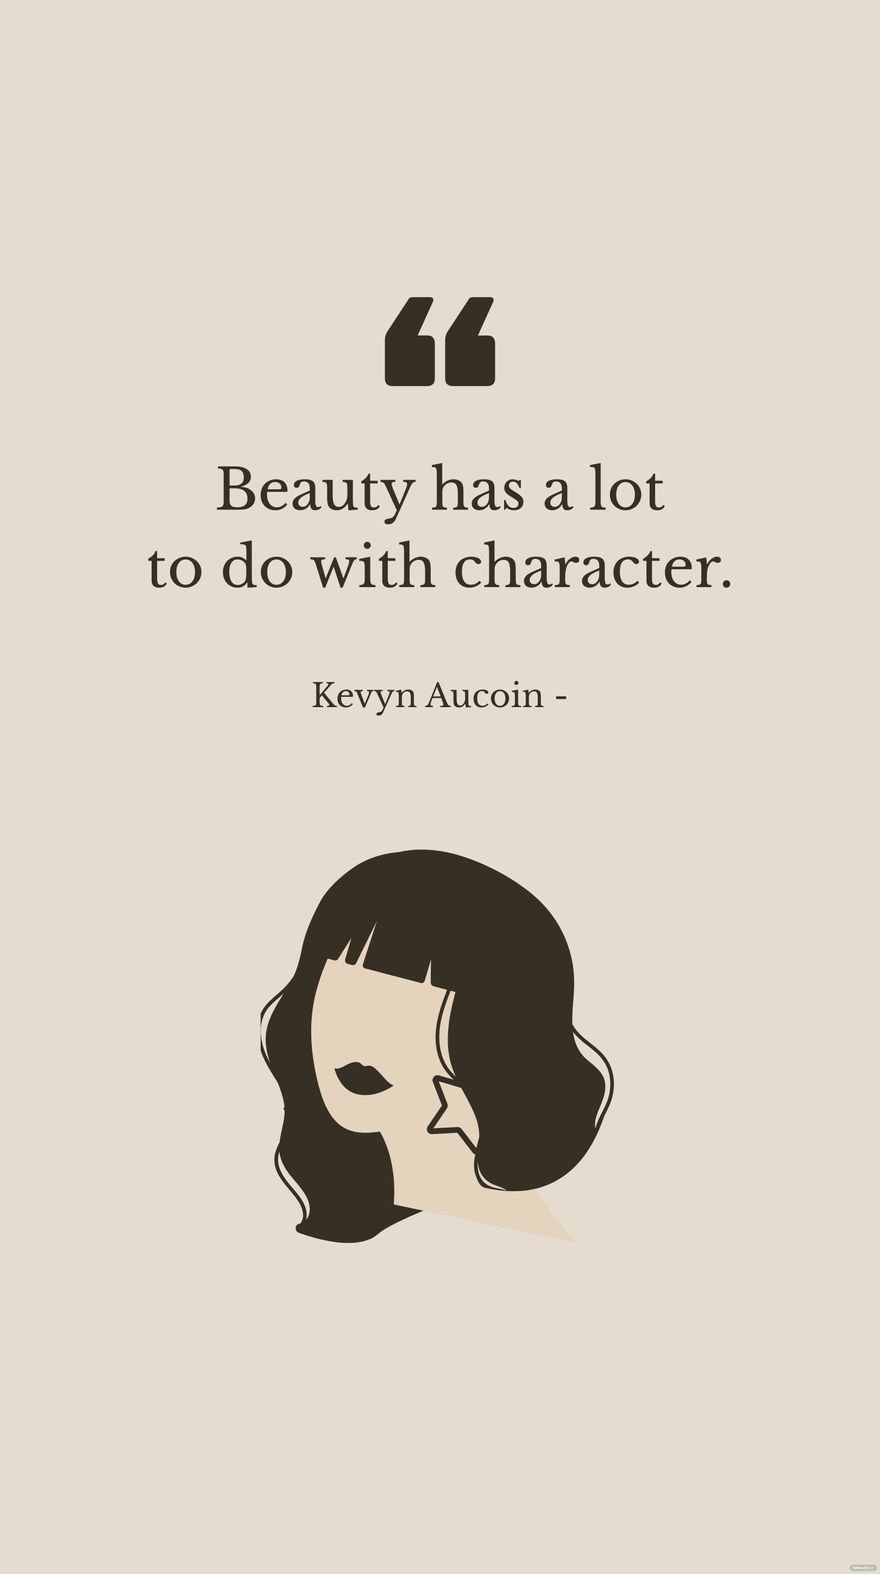 Kevyn Aucoin - Beauty has a lot to do with character.